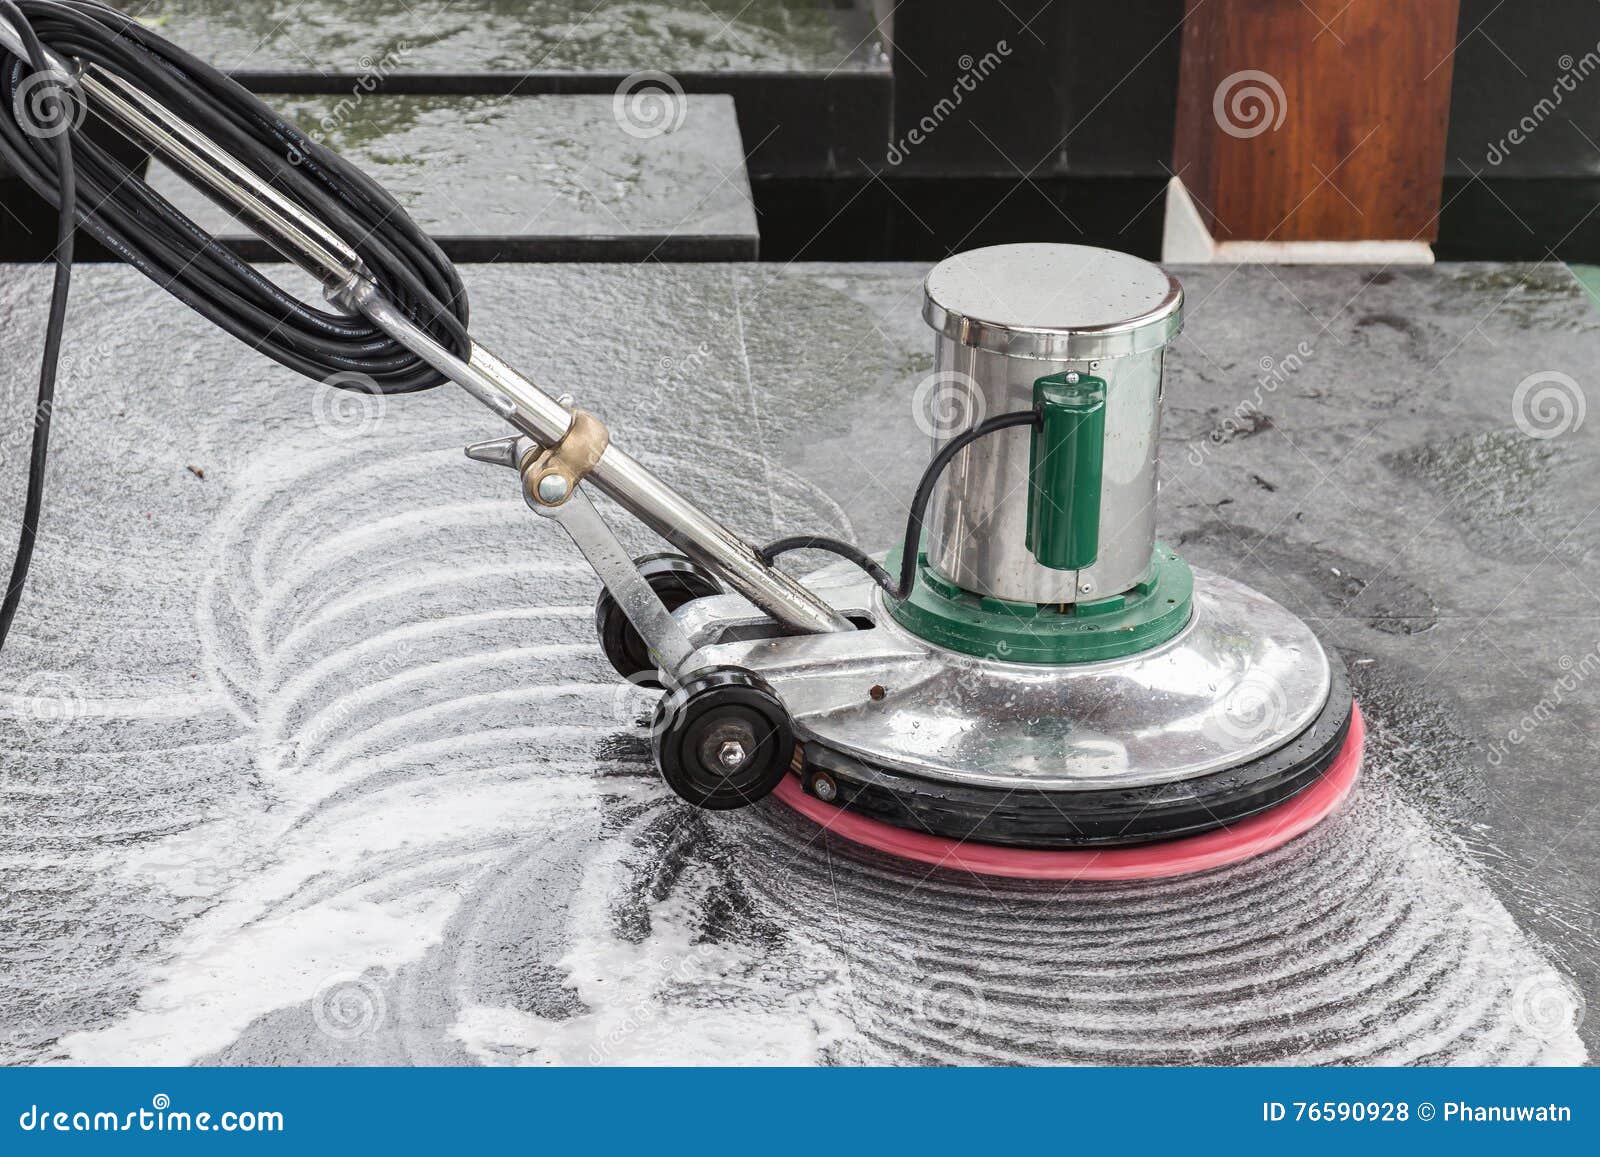 exterior stone floor cleaning with polishing machine and chemica